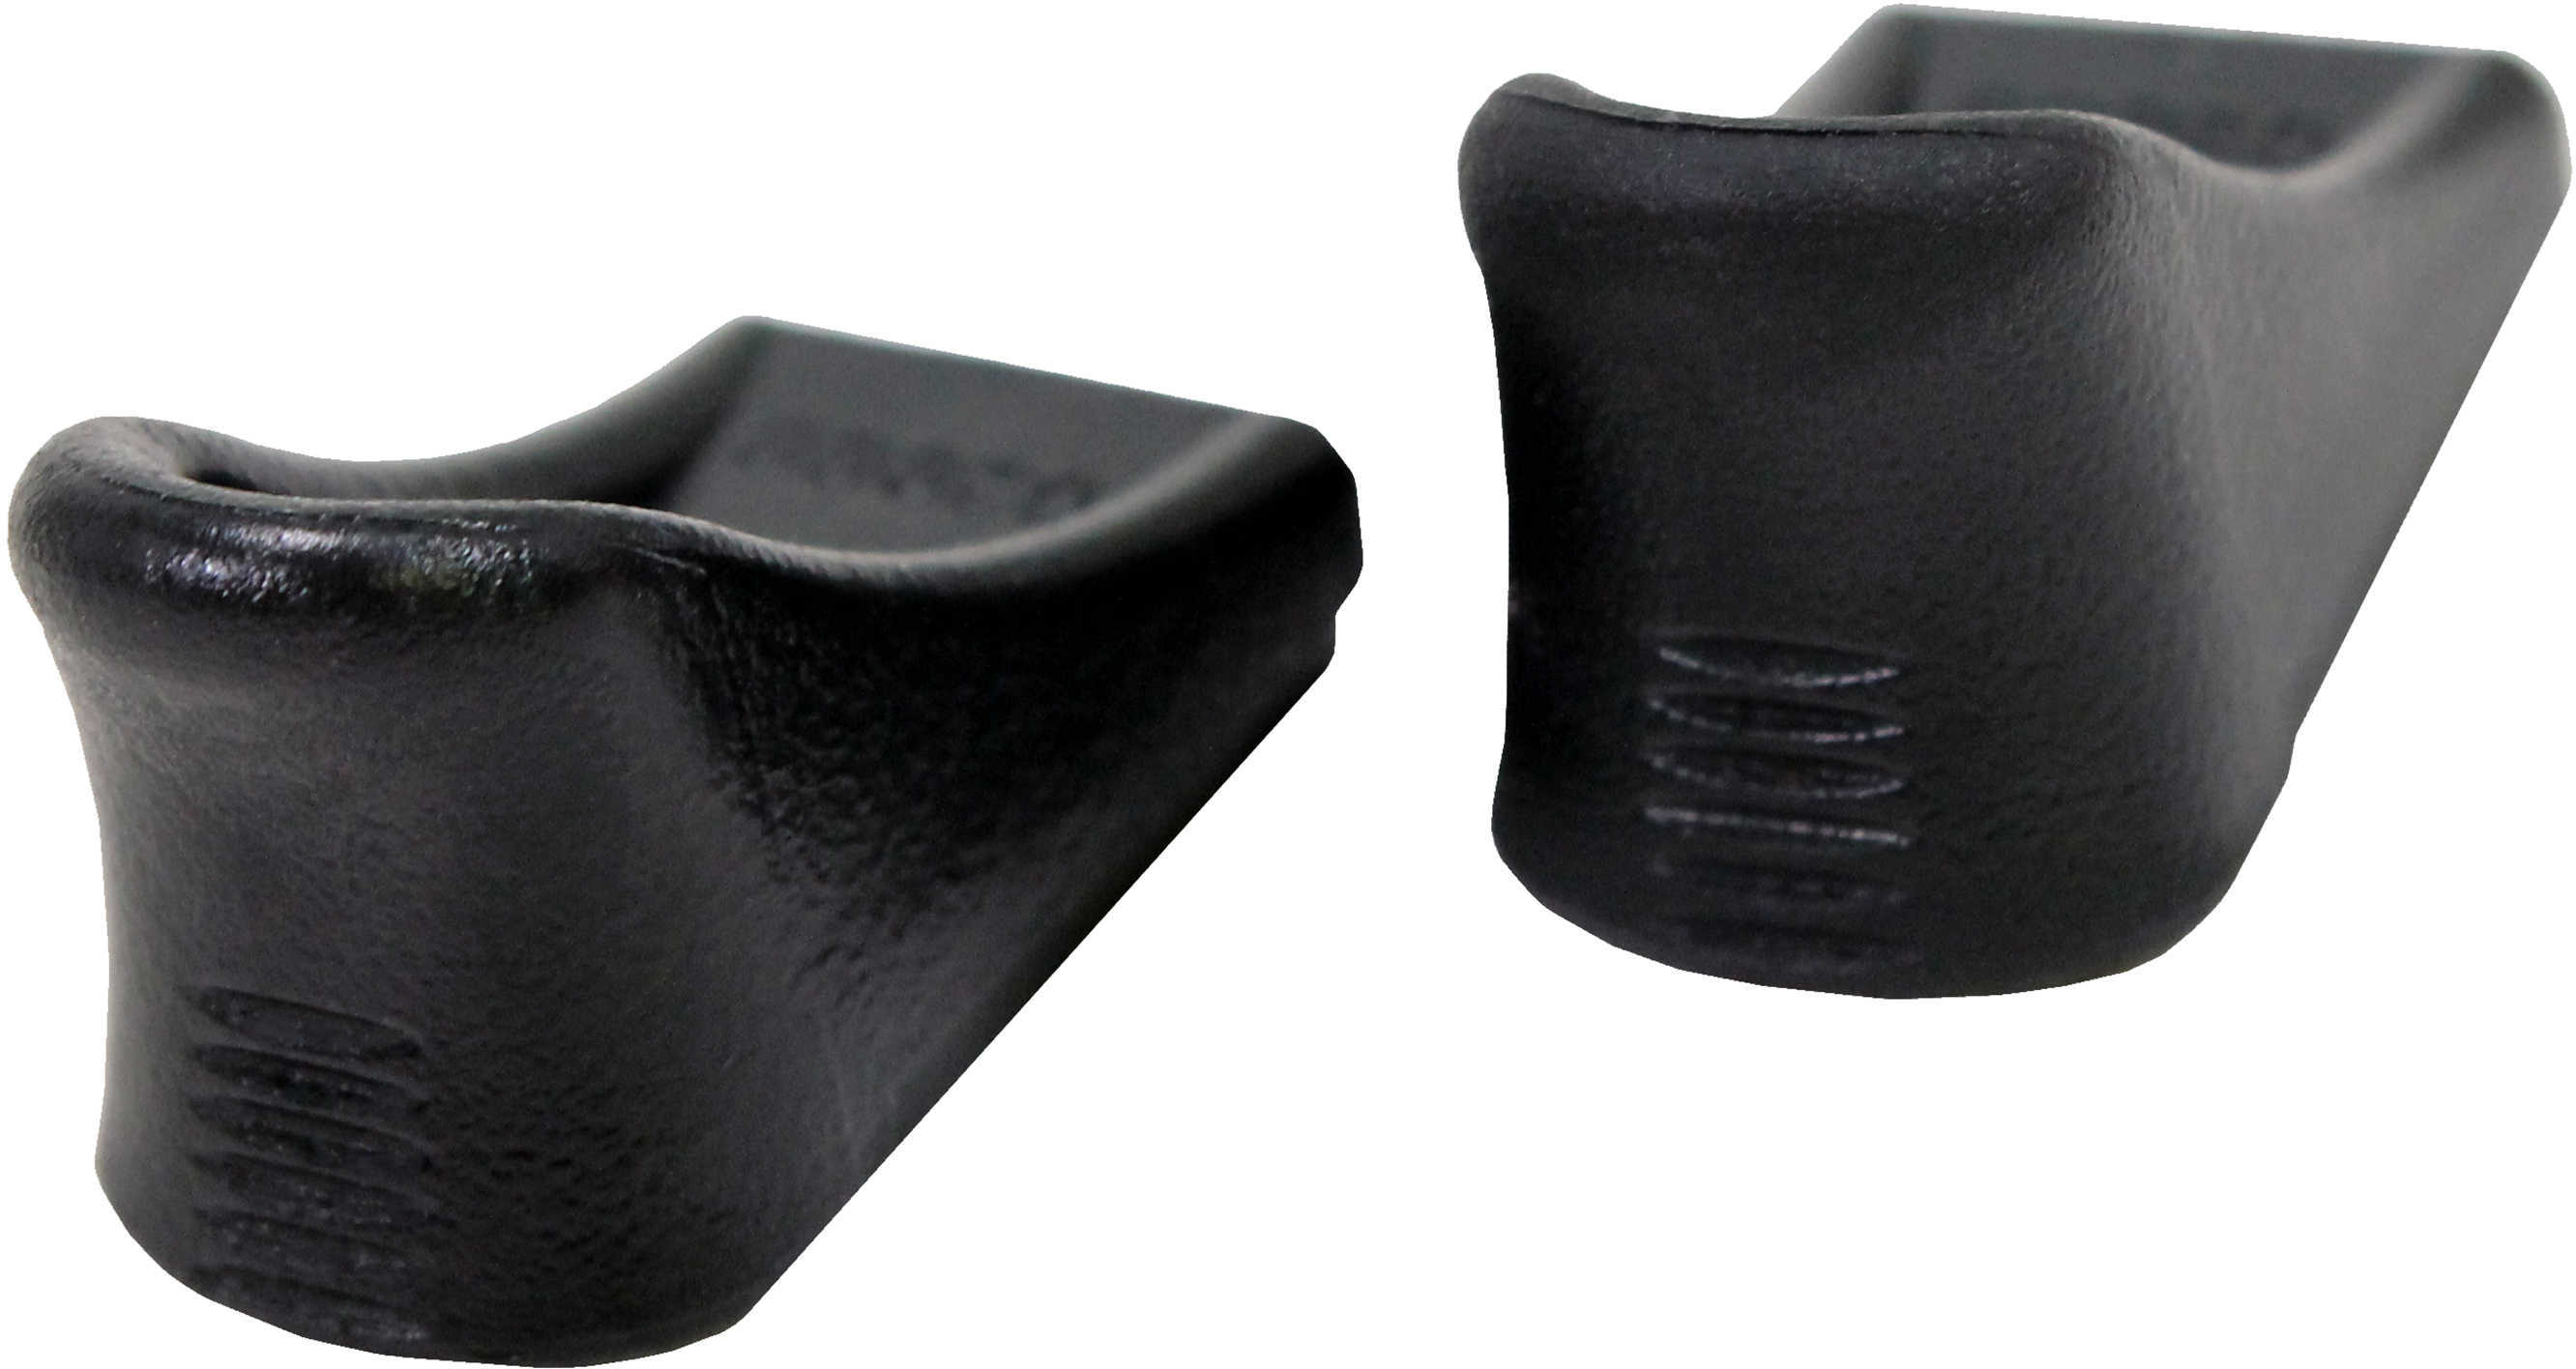 Pachmayr 03888 Grip Extender Ruger® LCP Black Finish